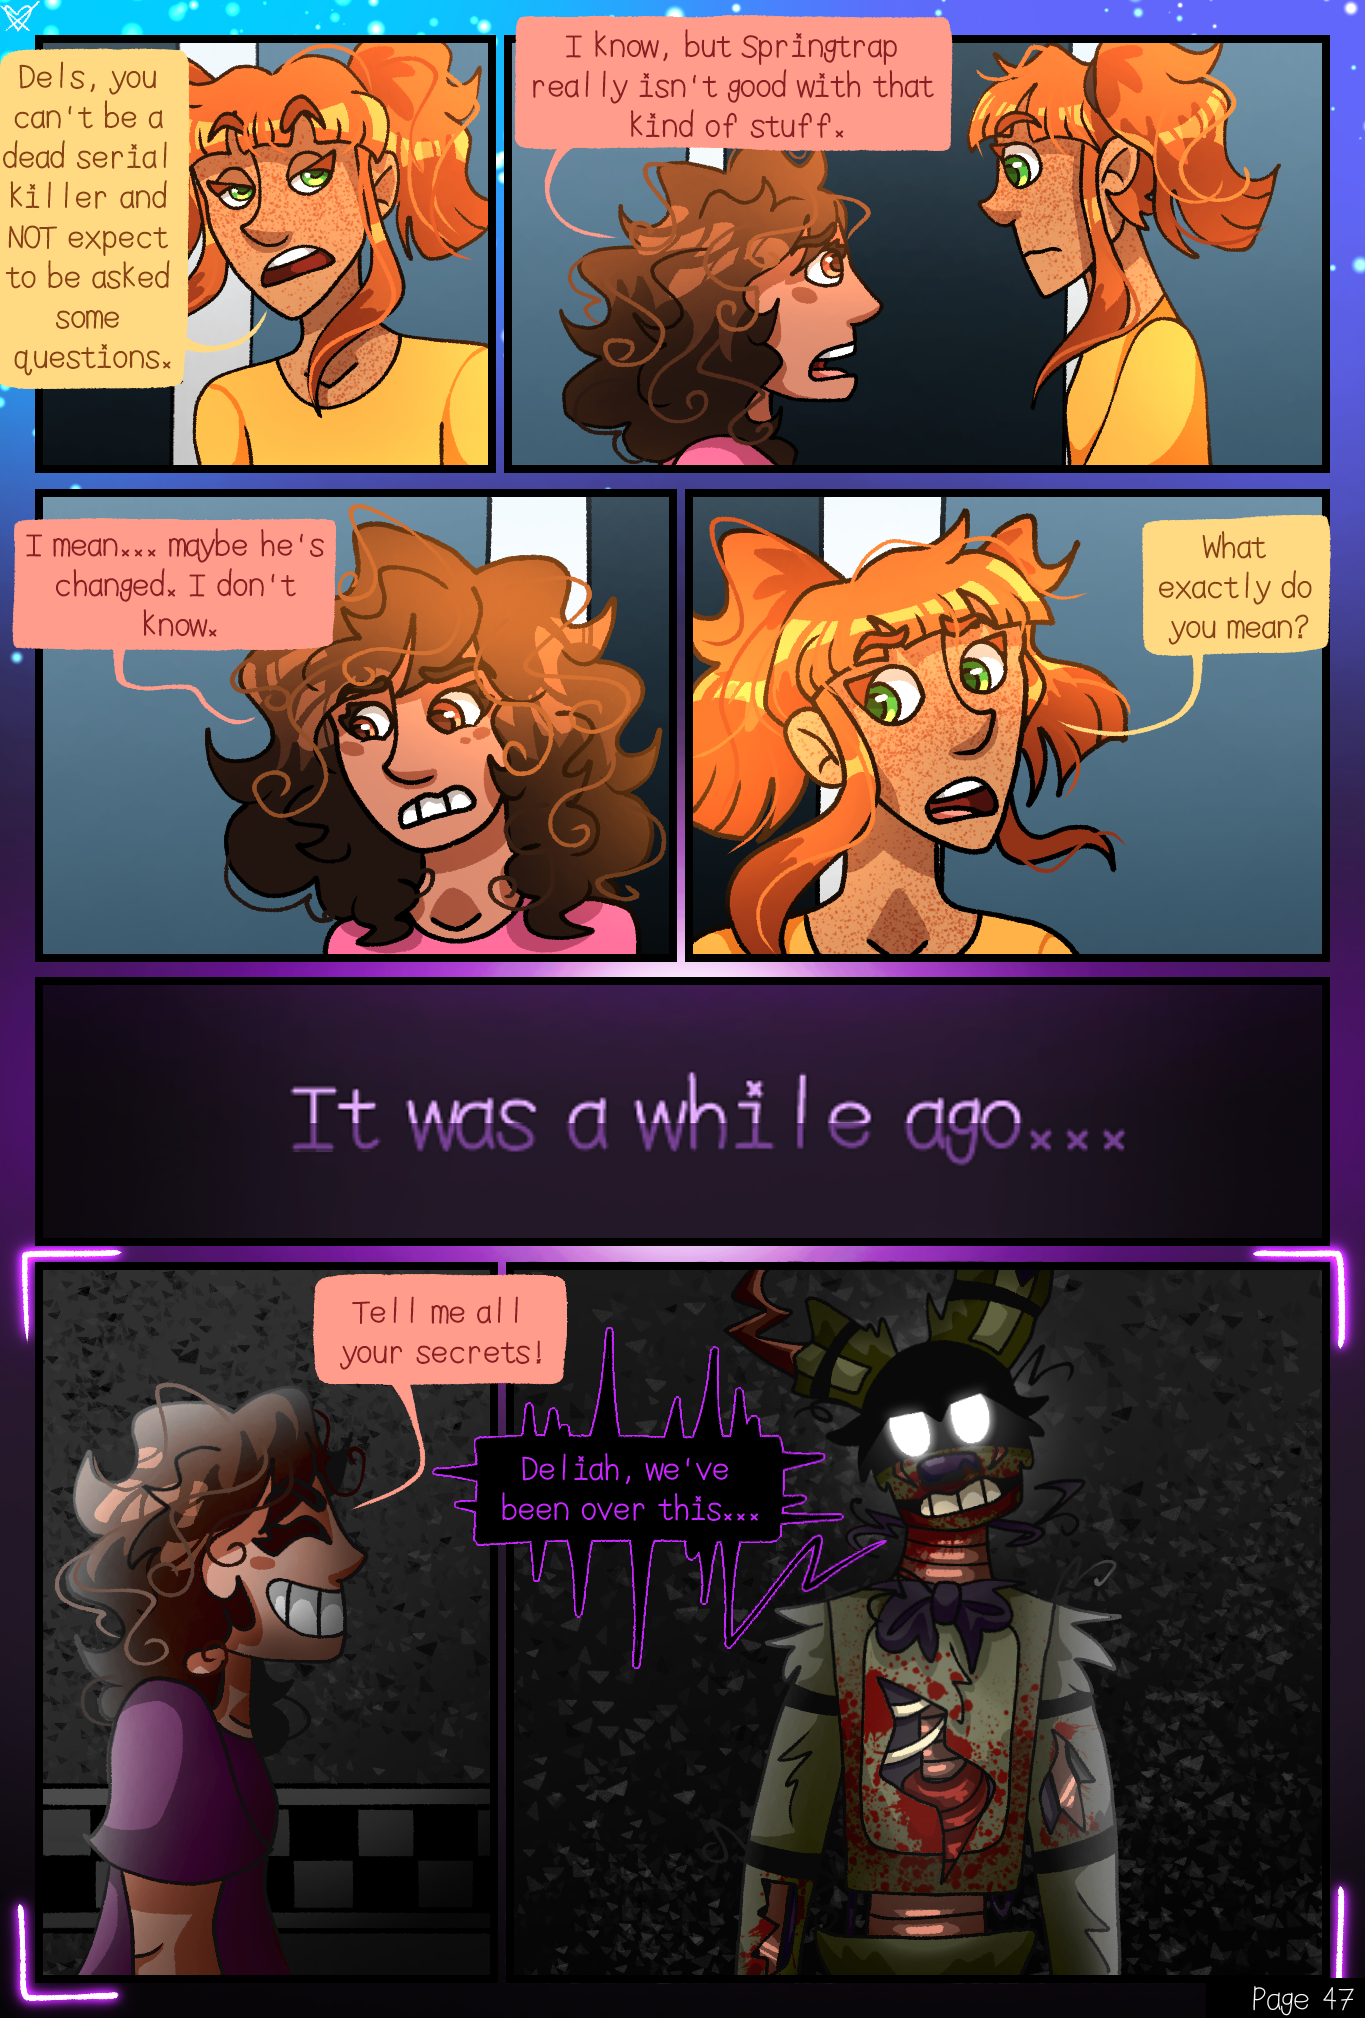 Blueycapsules fanmade comic preview